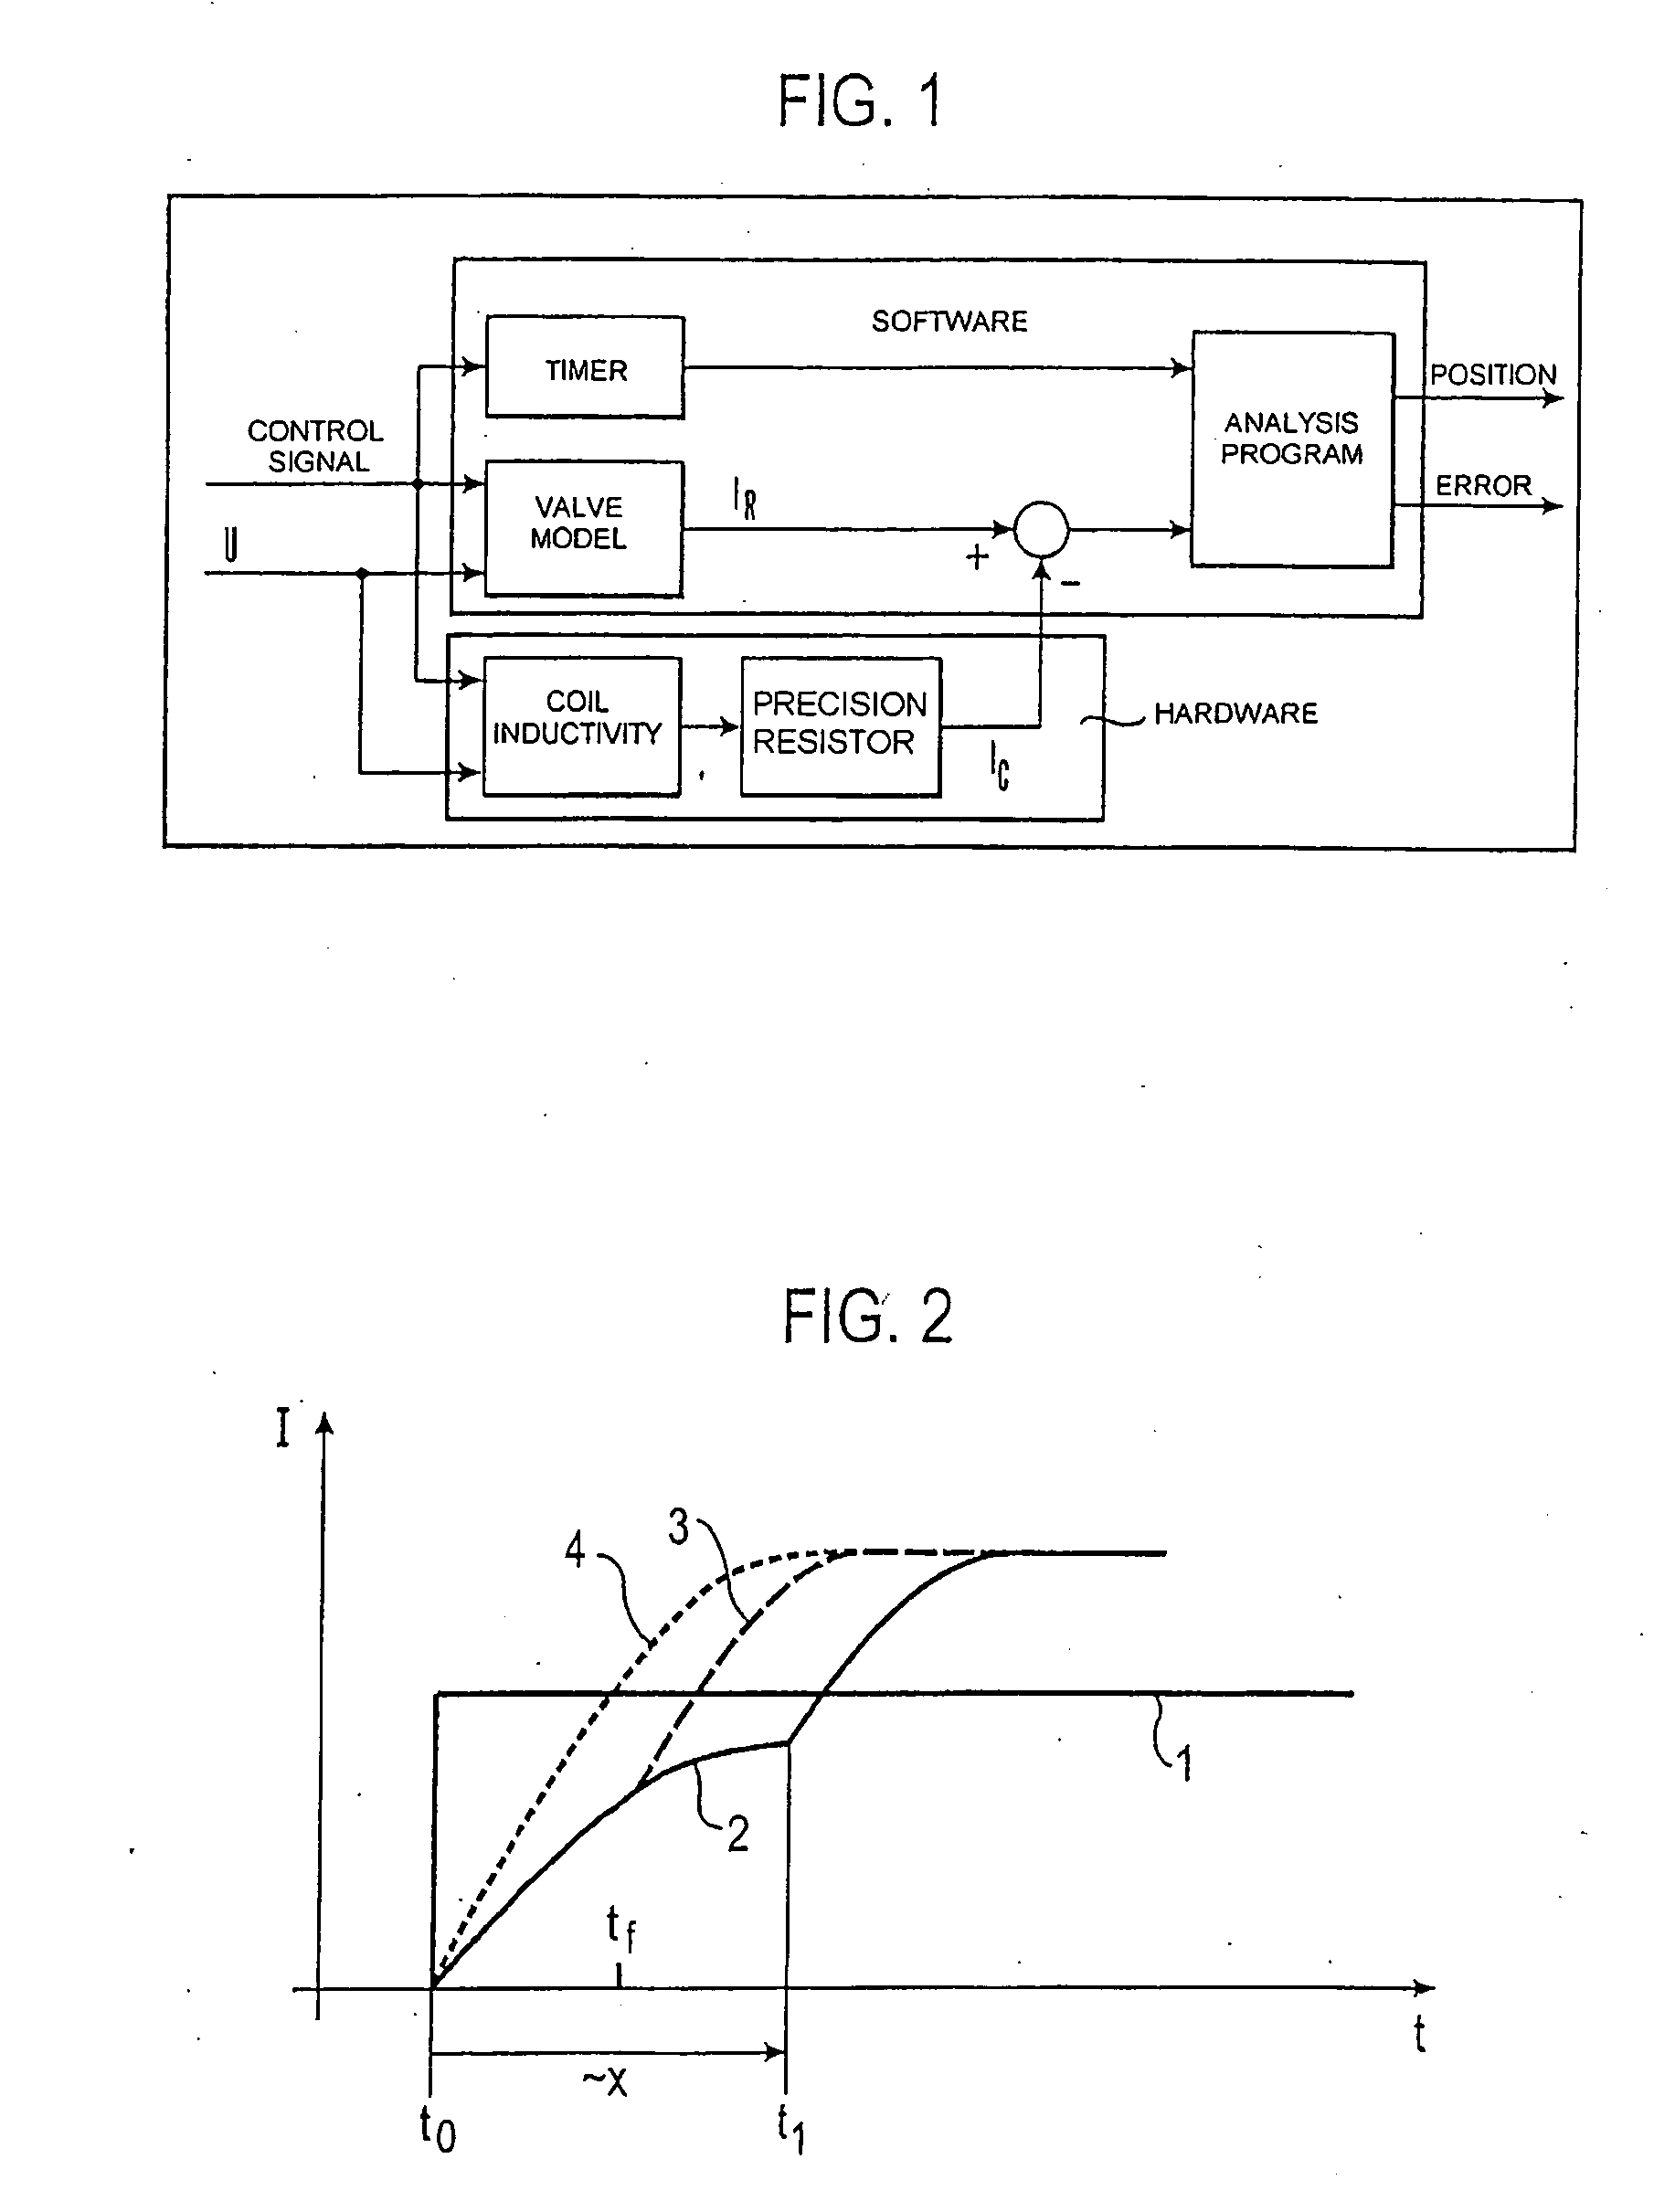 Method for determining the position of a slider in an electromechanical valve